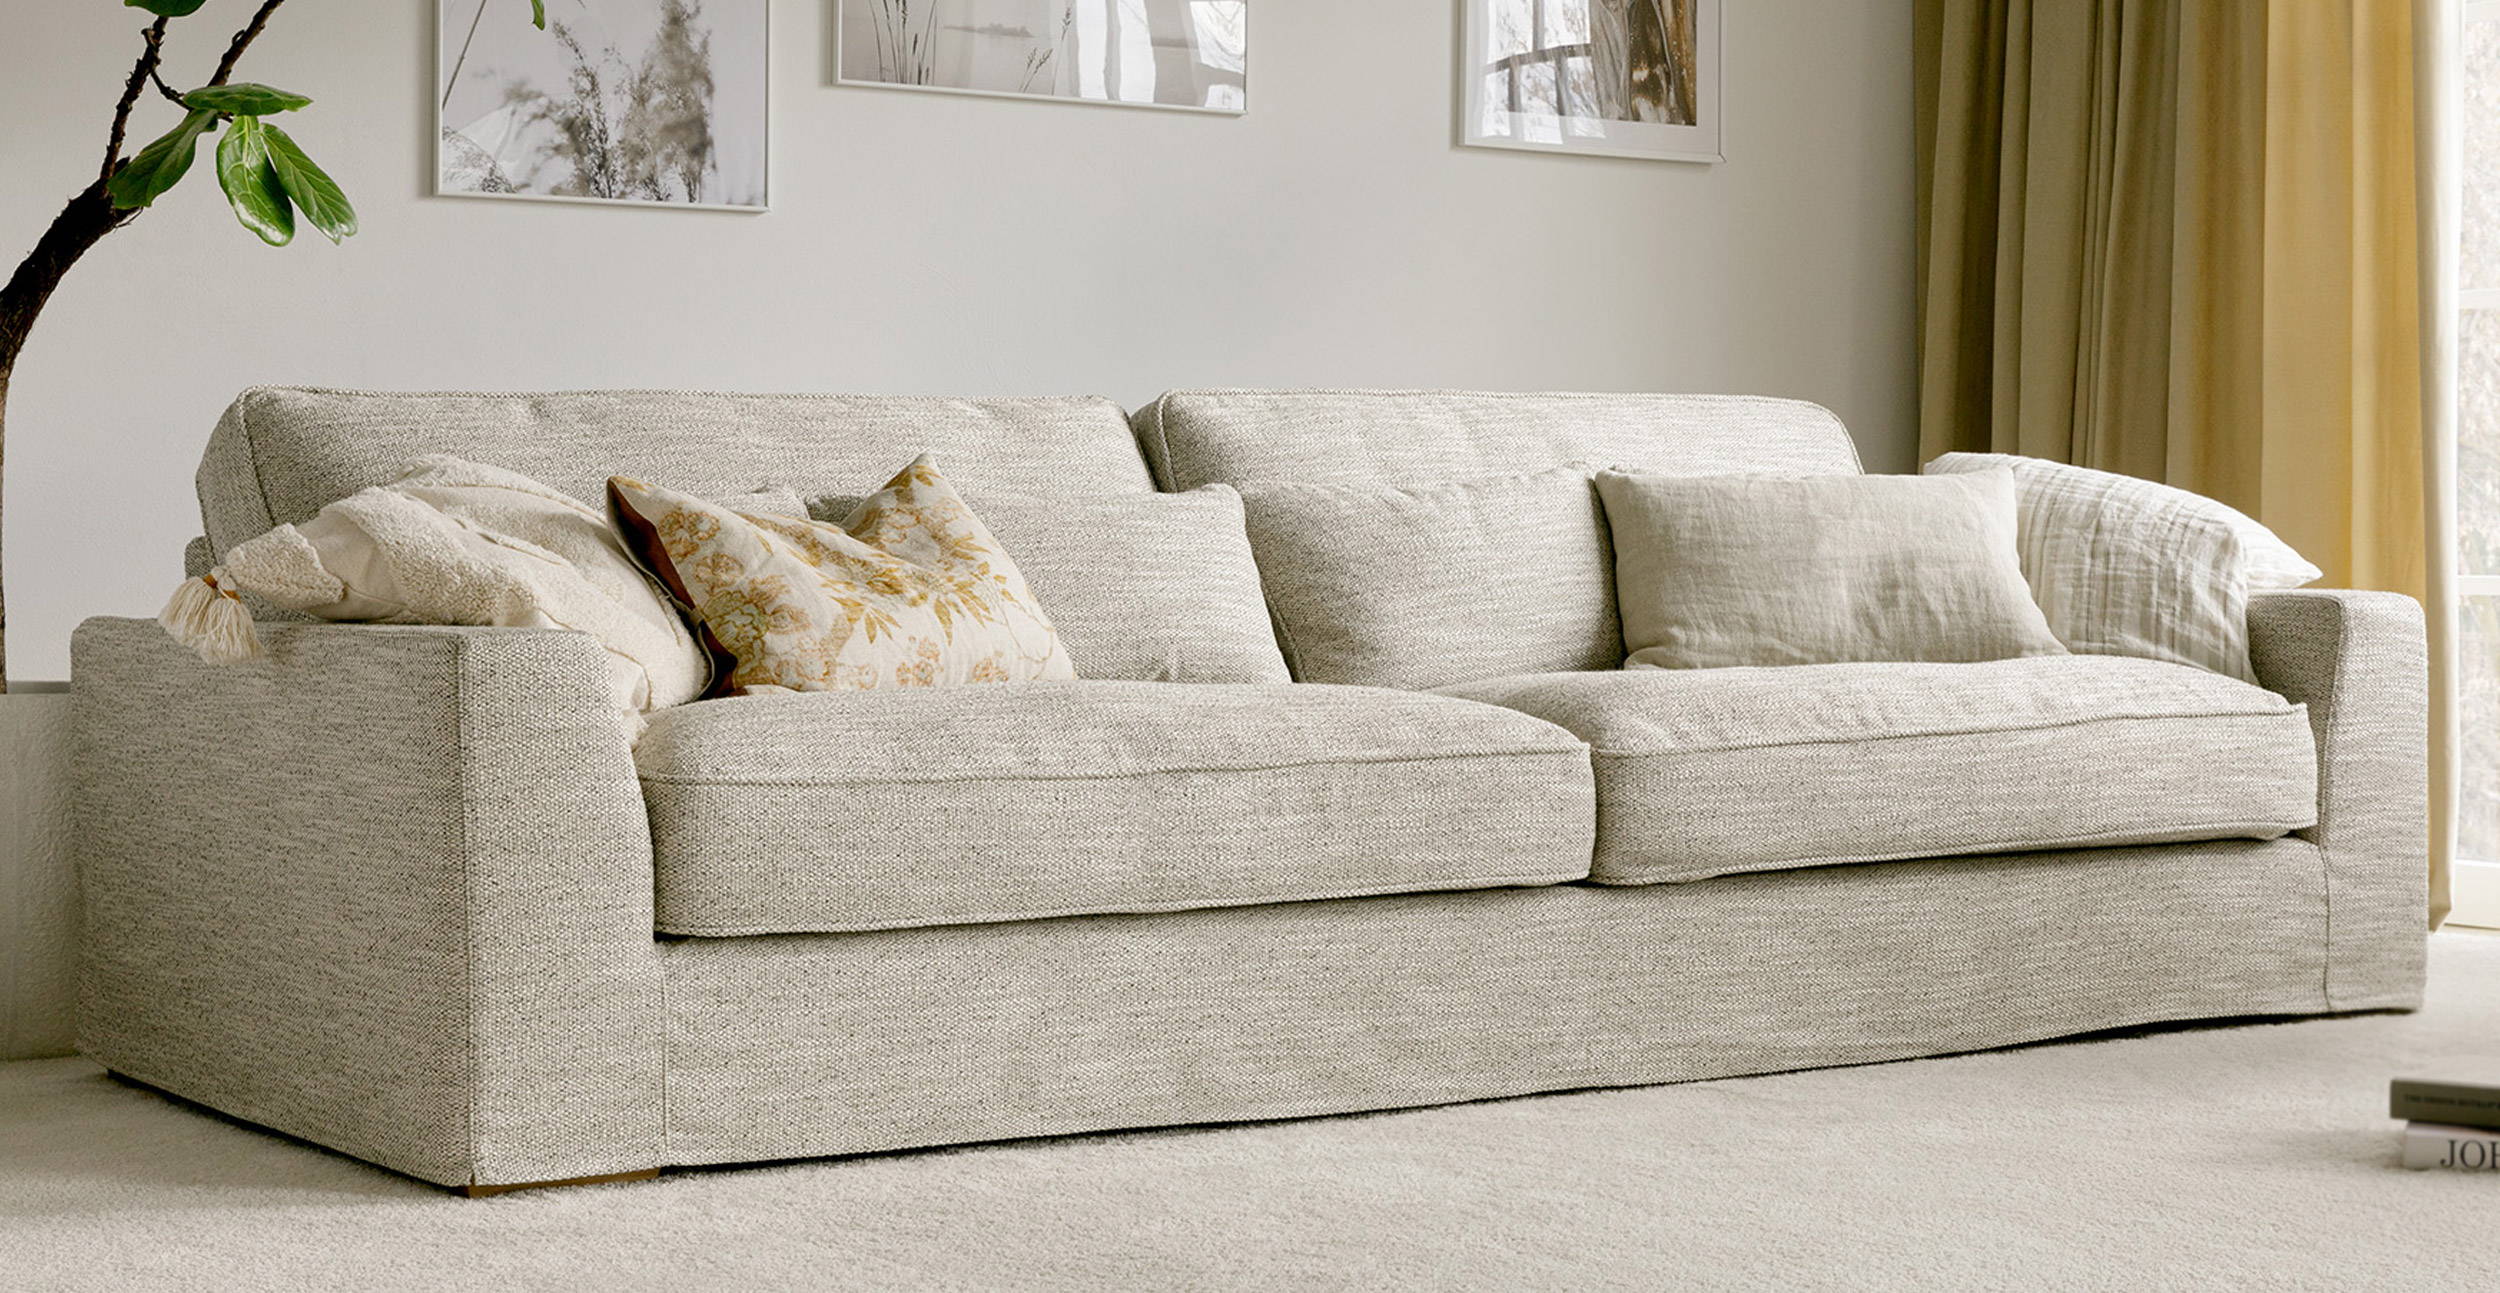 Merle Sofa Collection Coming Soon To Our Online Store